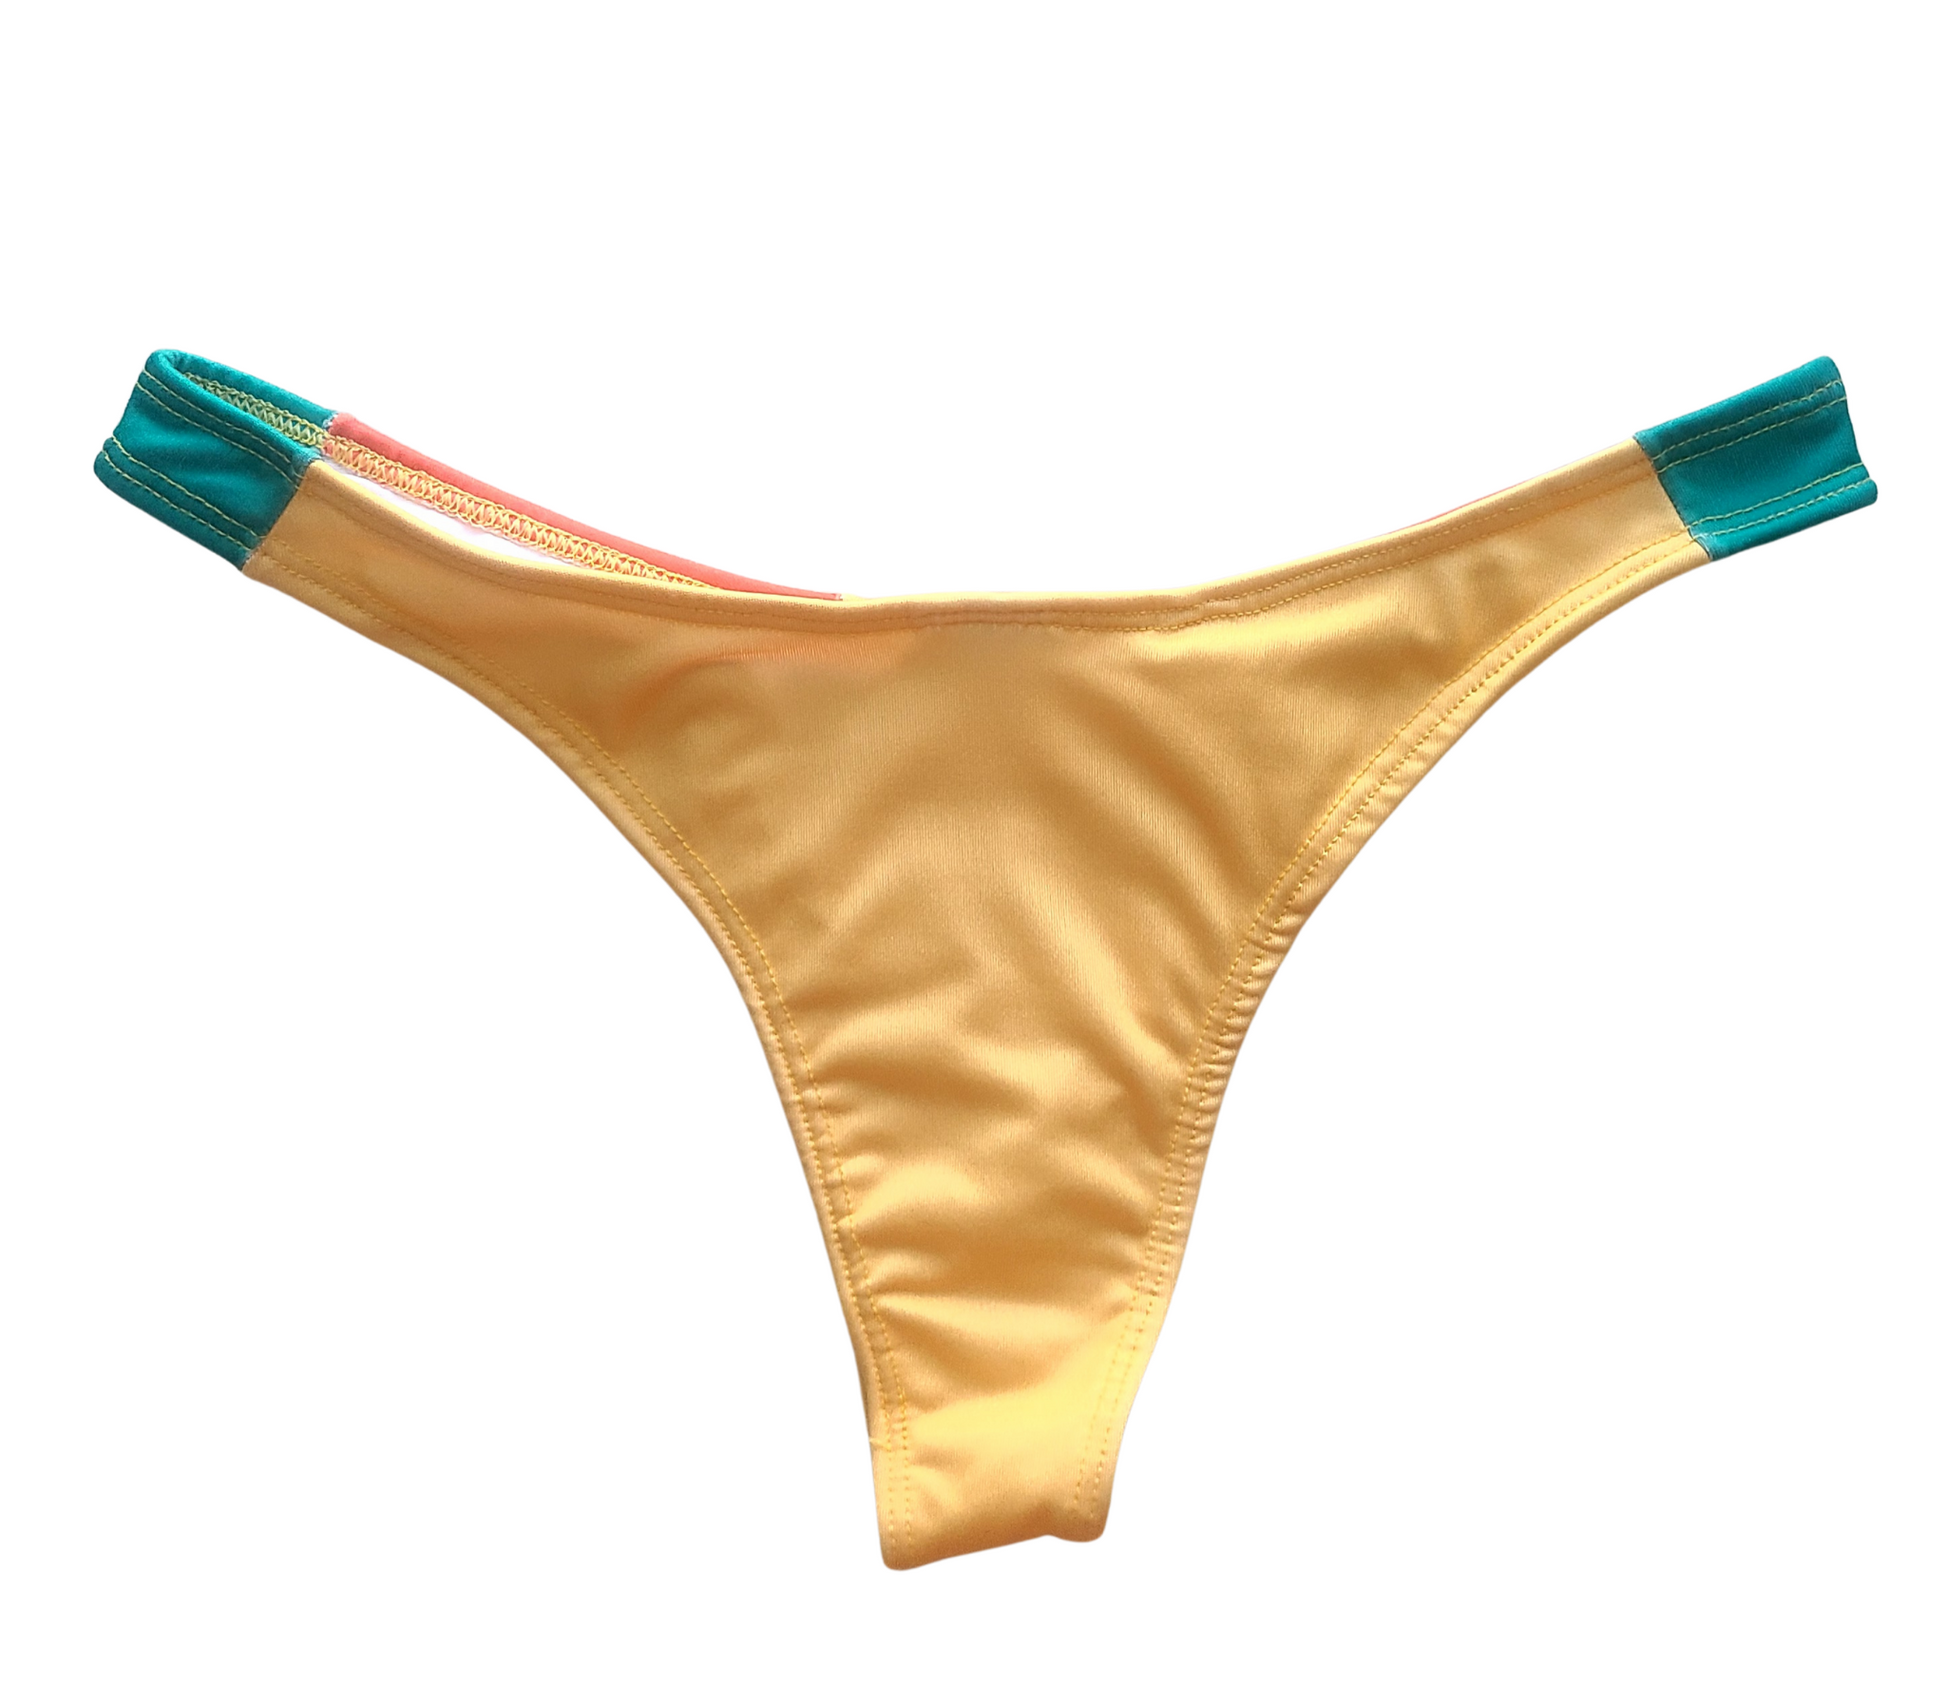 A three-toned bikini set featuring tie straps on the top and a thong-style bottom